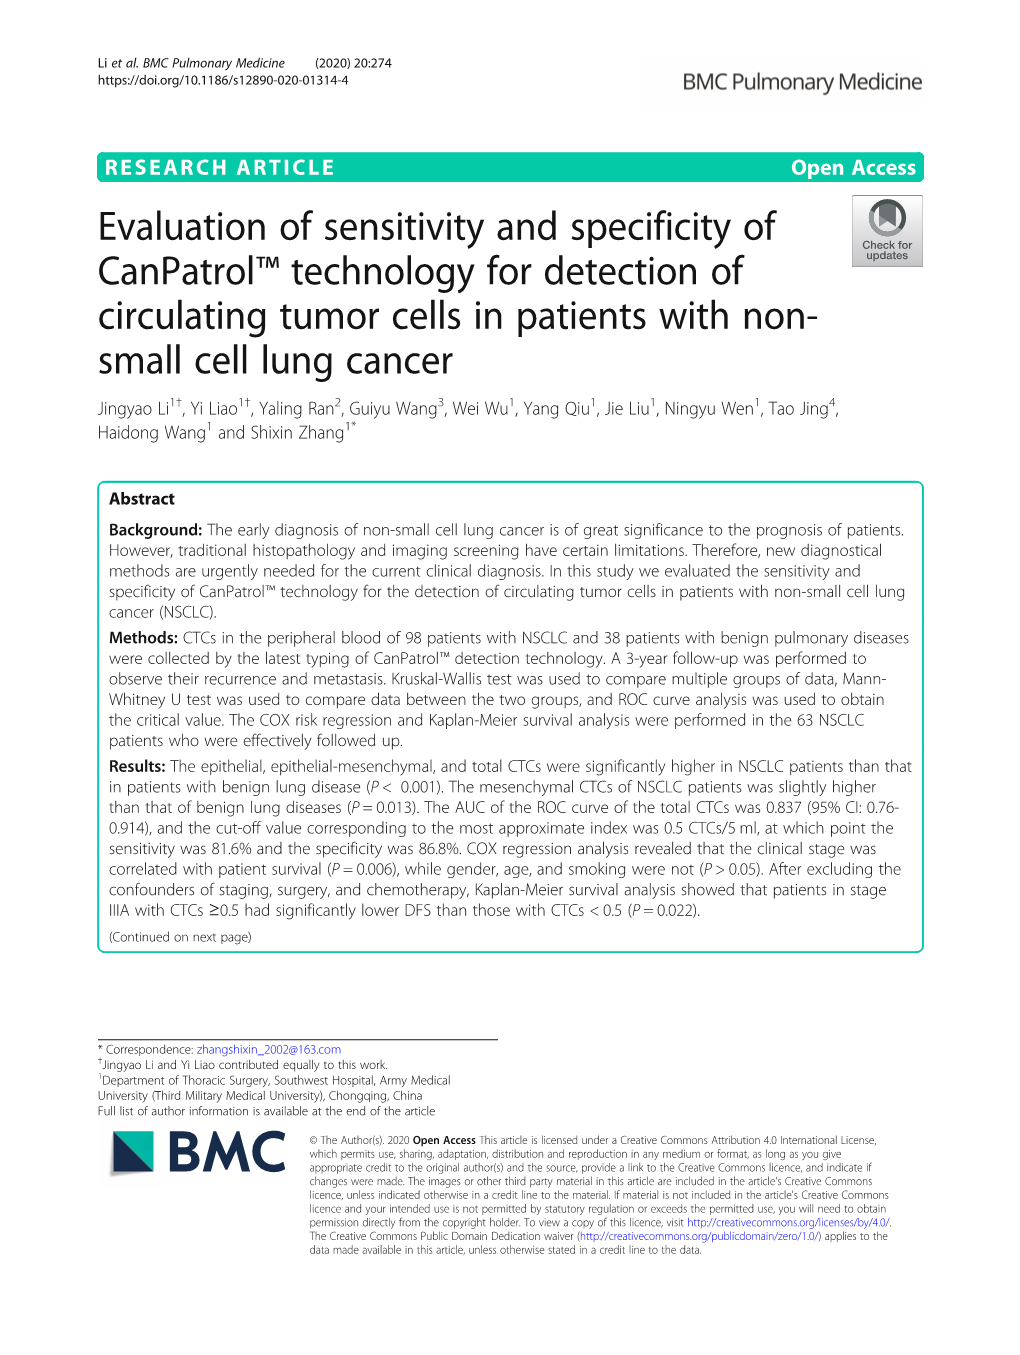 Evaluation of Sensitivity and Specificity of Canpatrol™ Technology For